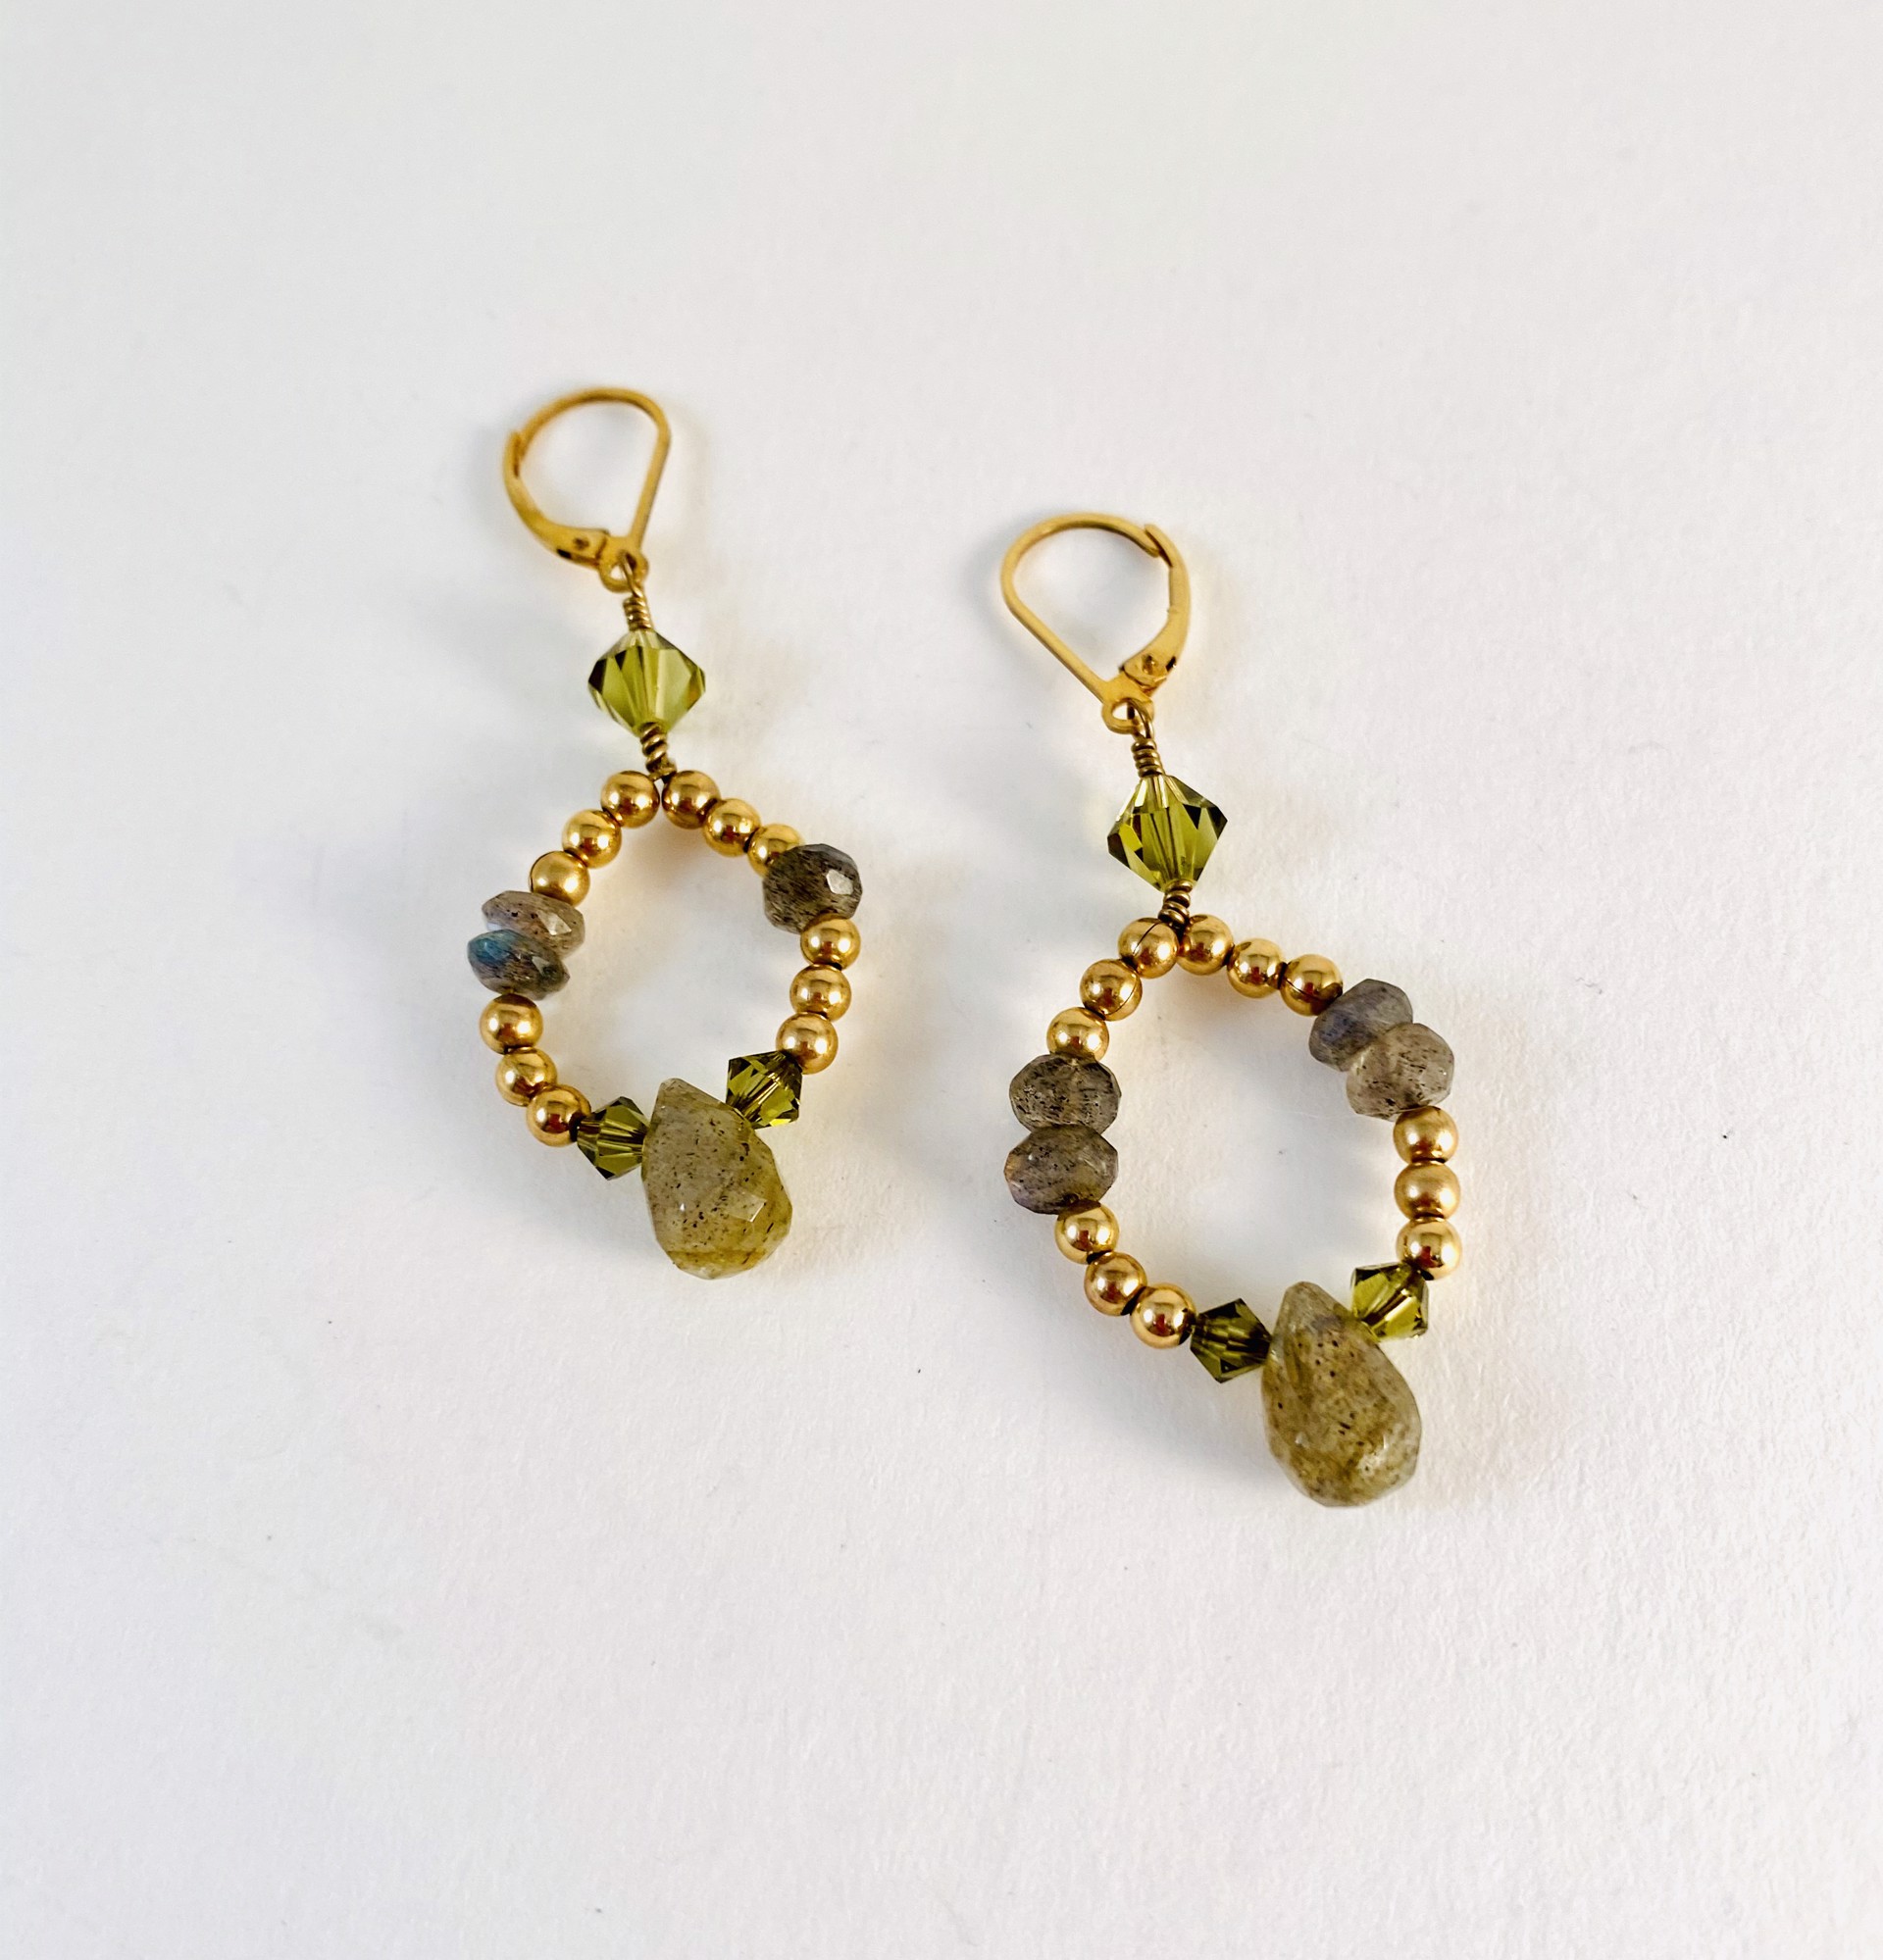 Labradorite, Crystal and Gold Bead Earrings SHOSH19 by Shoshannah Weinisch